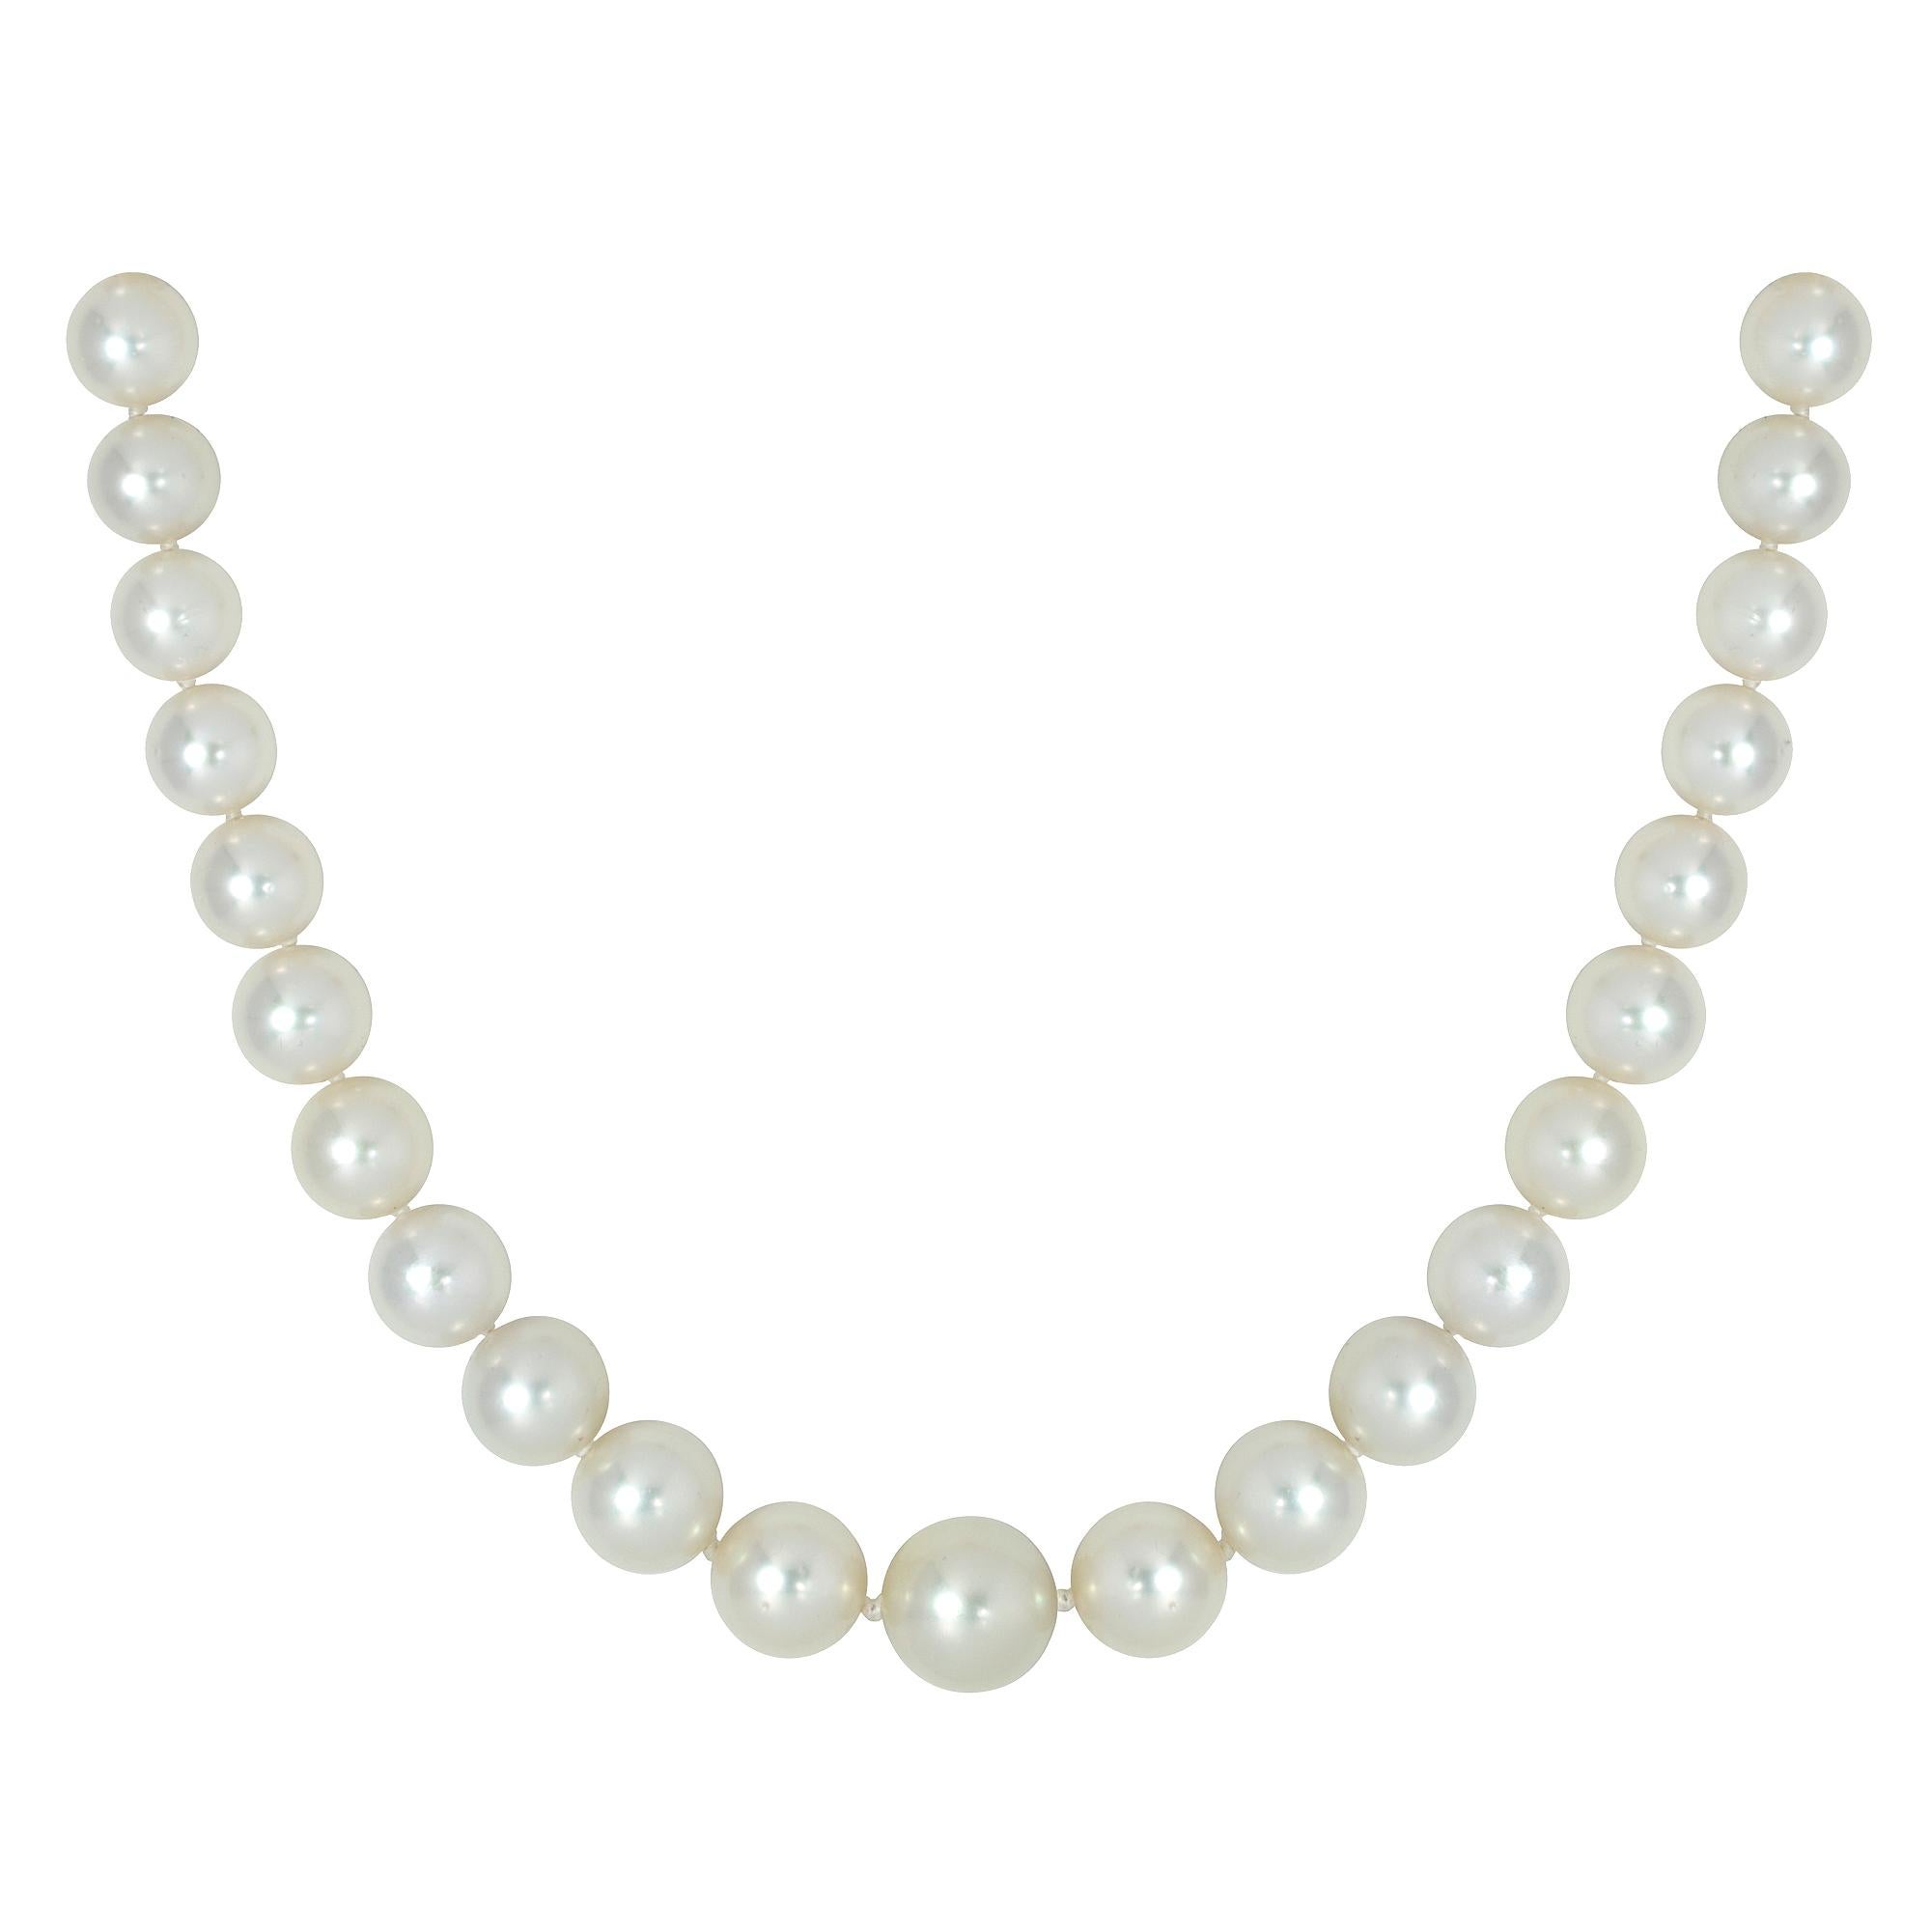 A South sea cultured pearl necklace, the forty-one pearls graduating from the centre measuring from 14.5mm to 10mm in diameter, strung to a yellow gold oval clasp, hallmarked 18 carat, Edinburgh, 2007,  the necklace measuring approximately 52cm